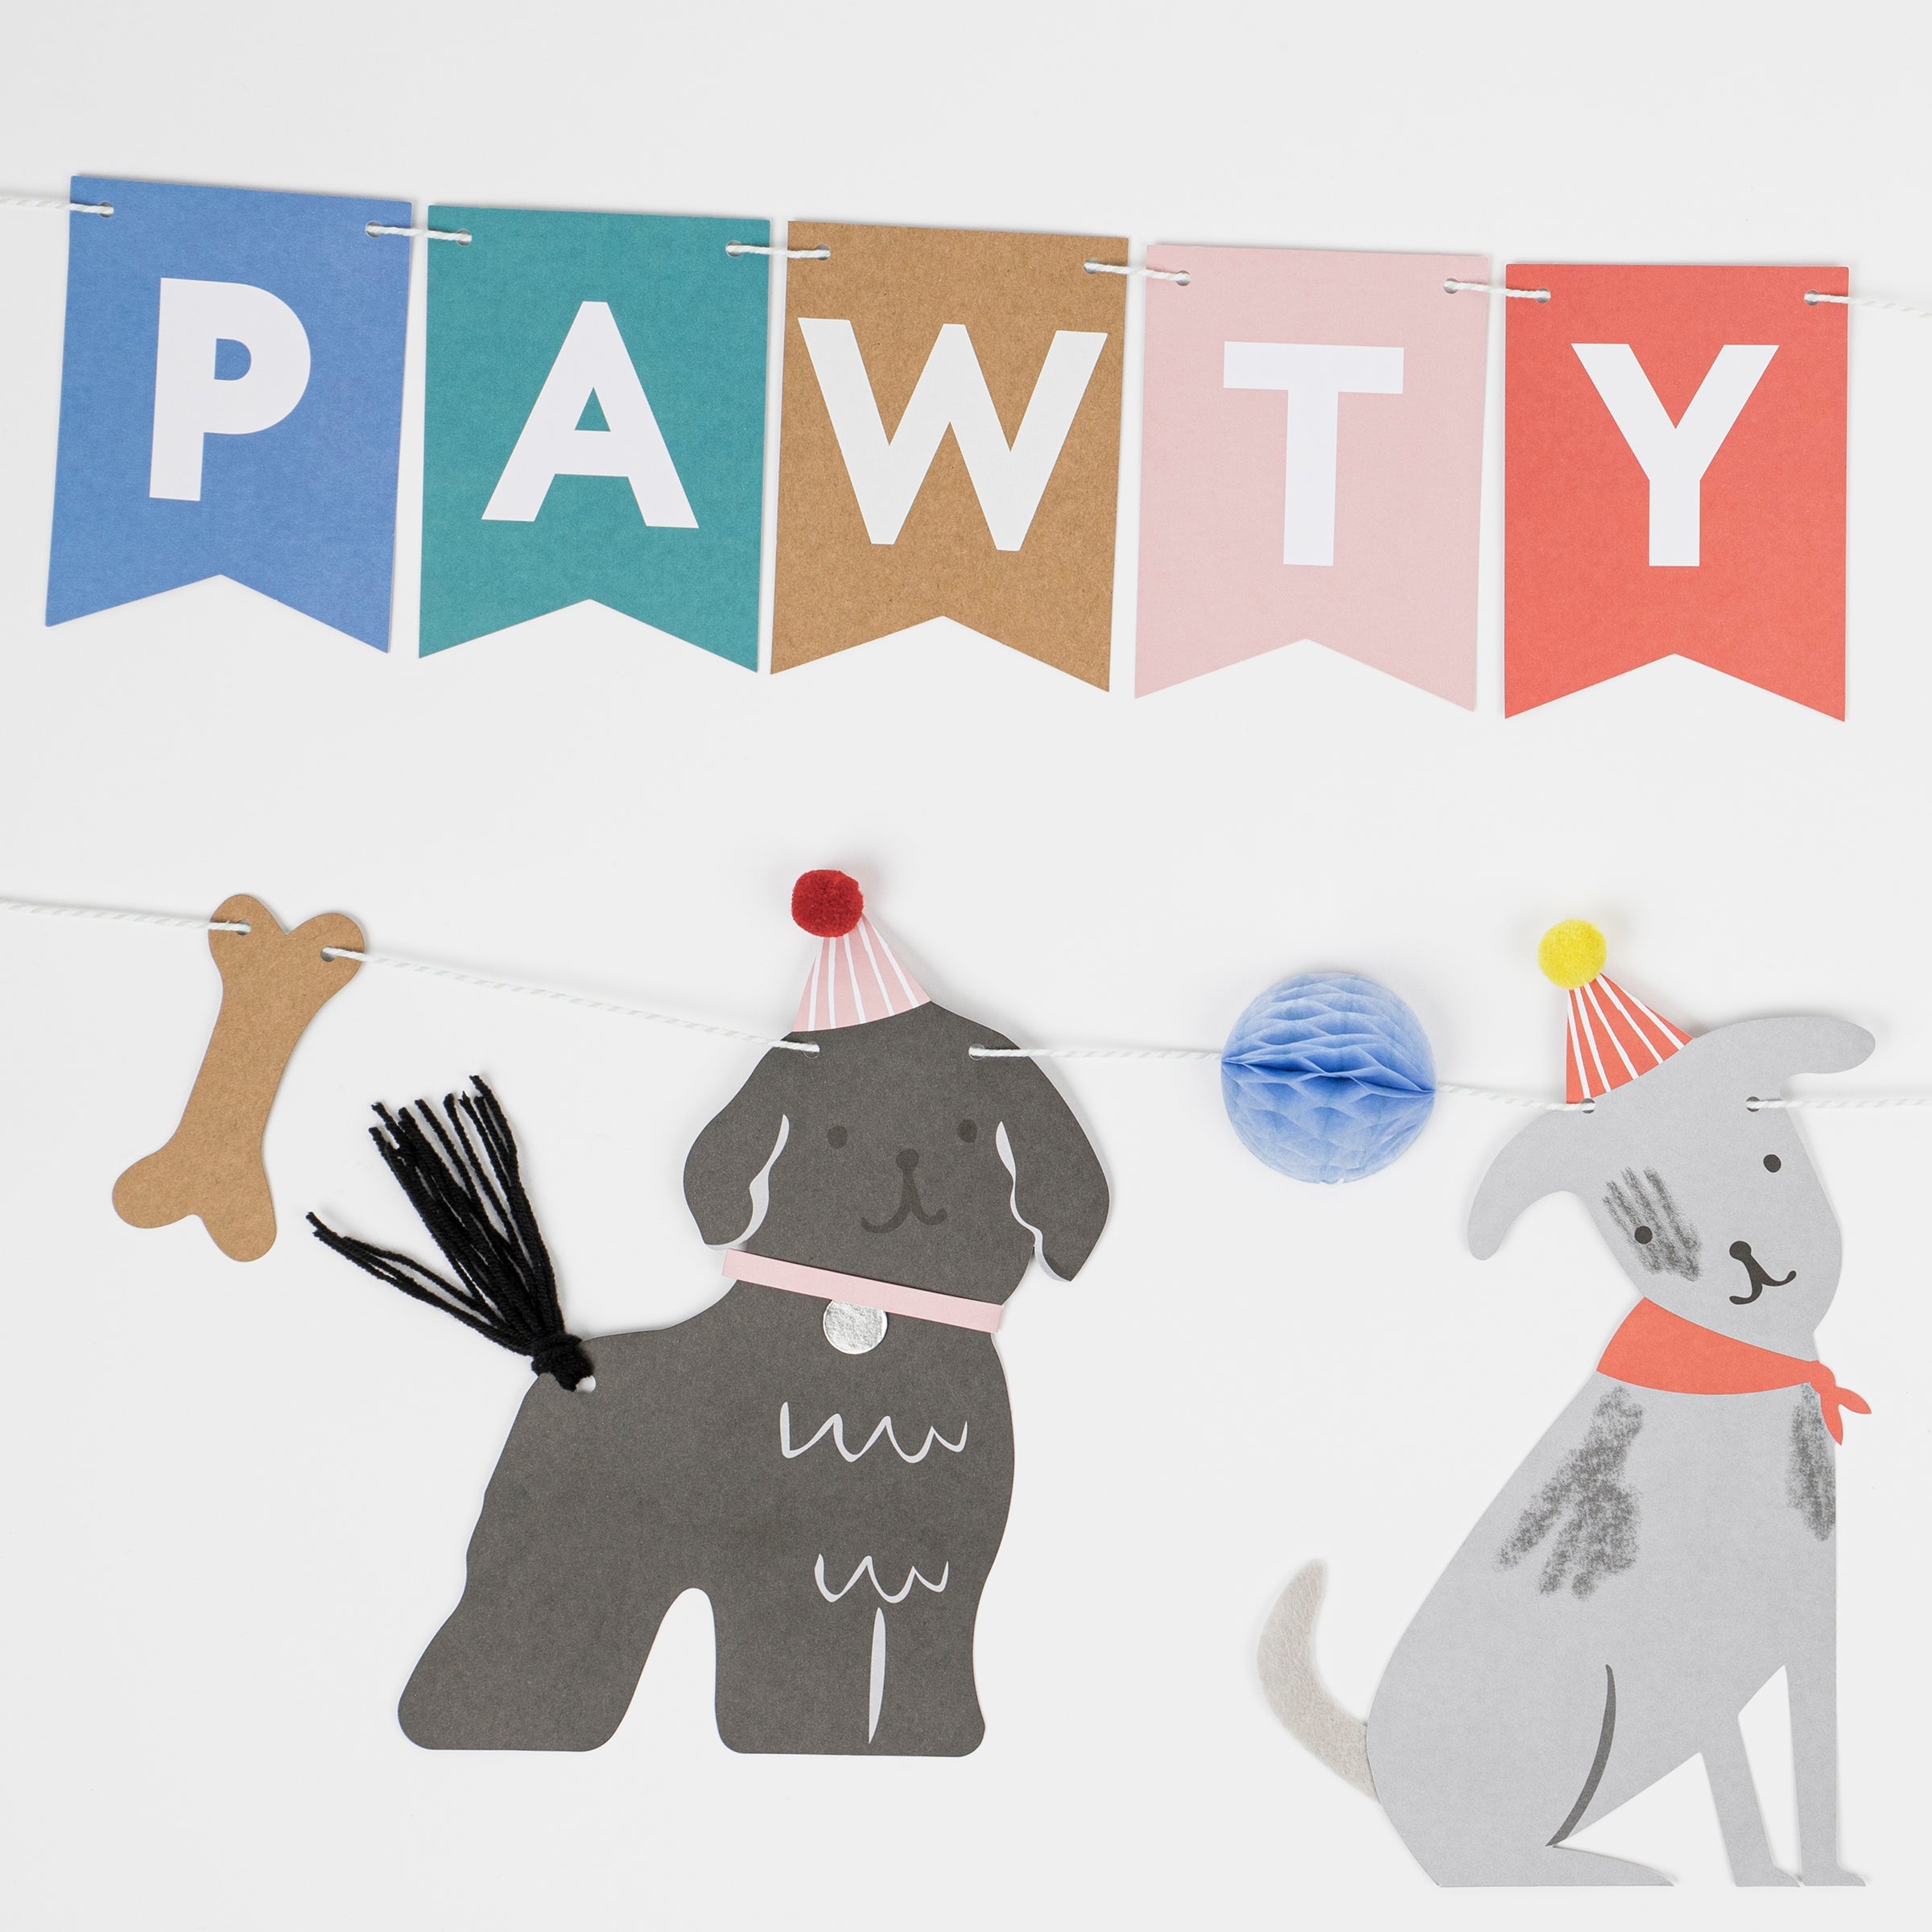 This adorable paper garland, featuring dogs, is perfect for a dog's birthday party or a dog themed party.